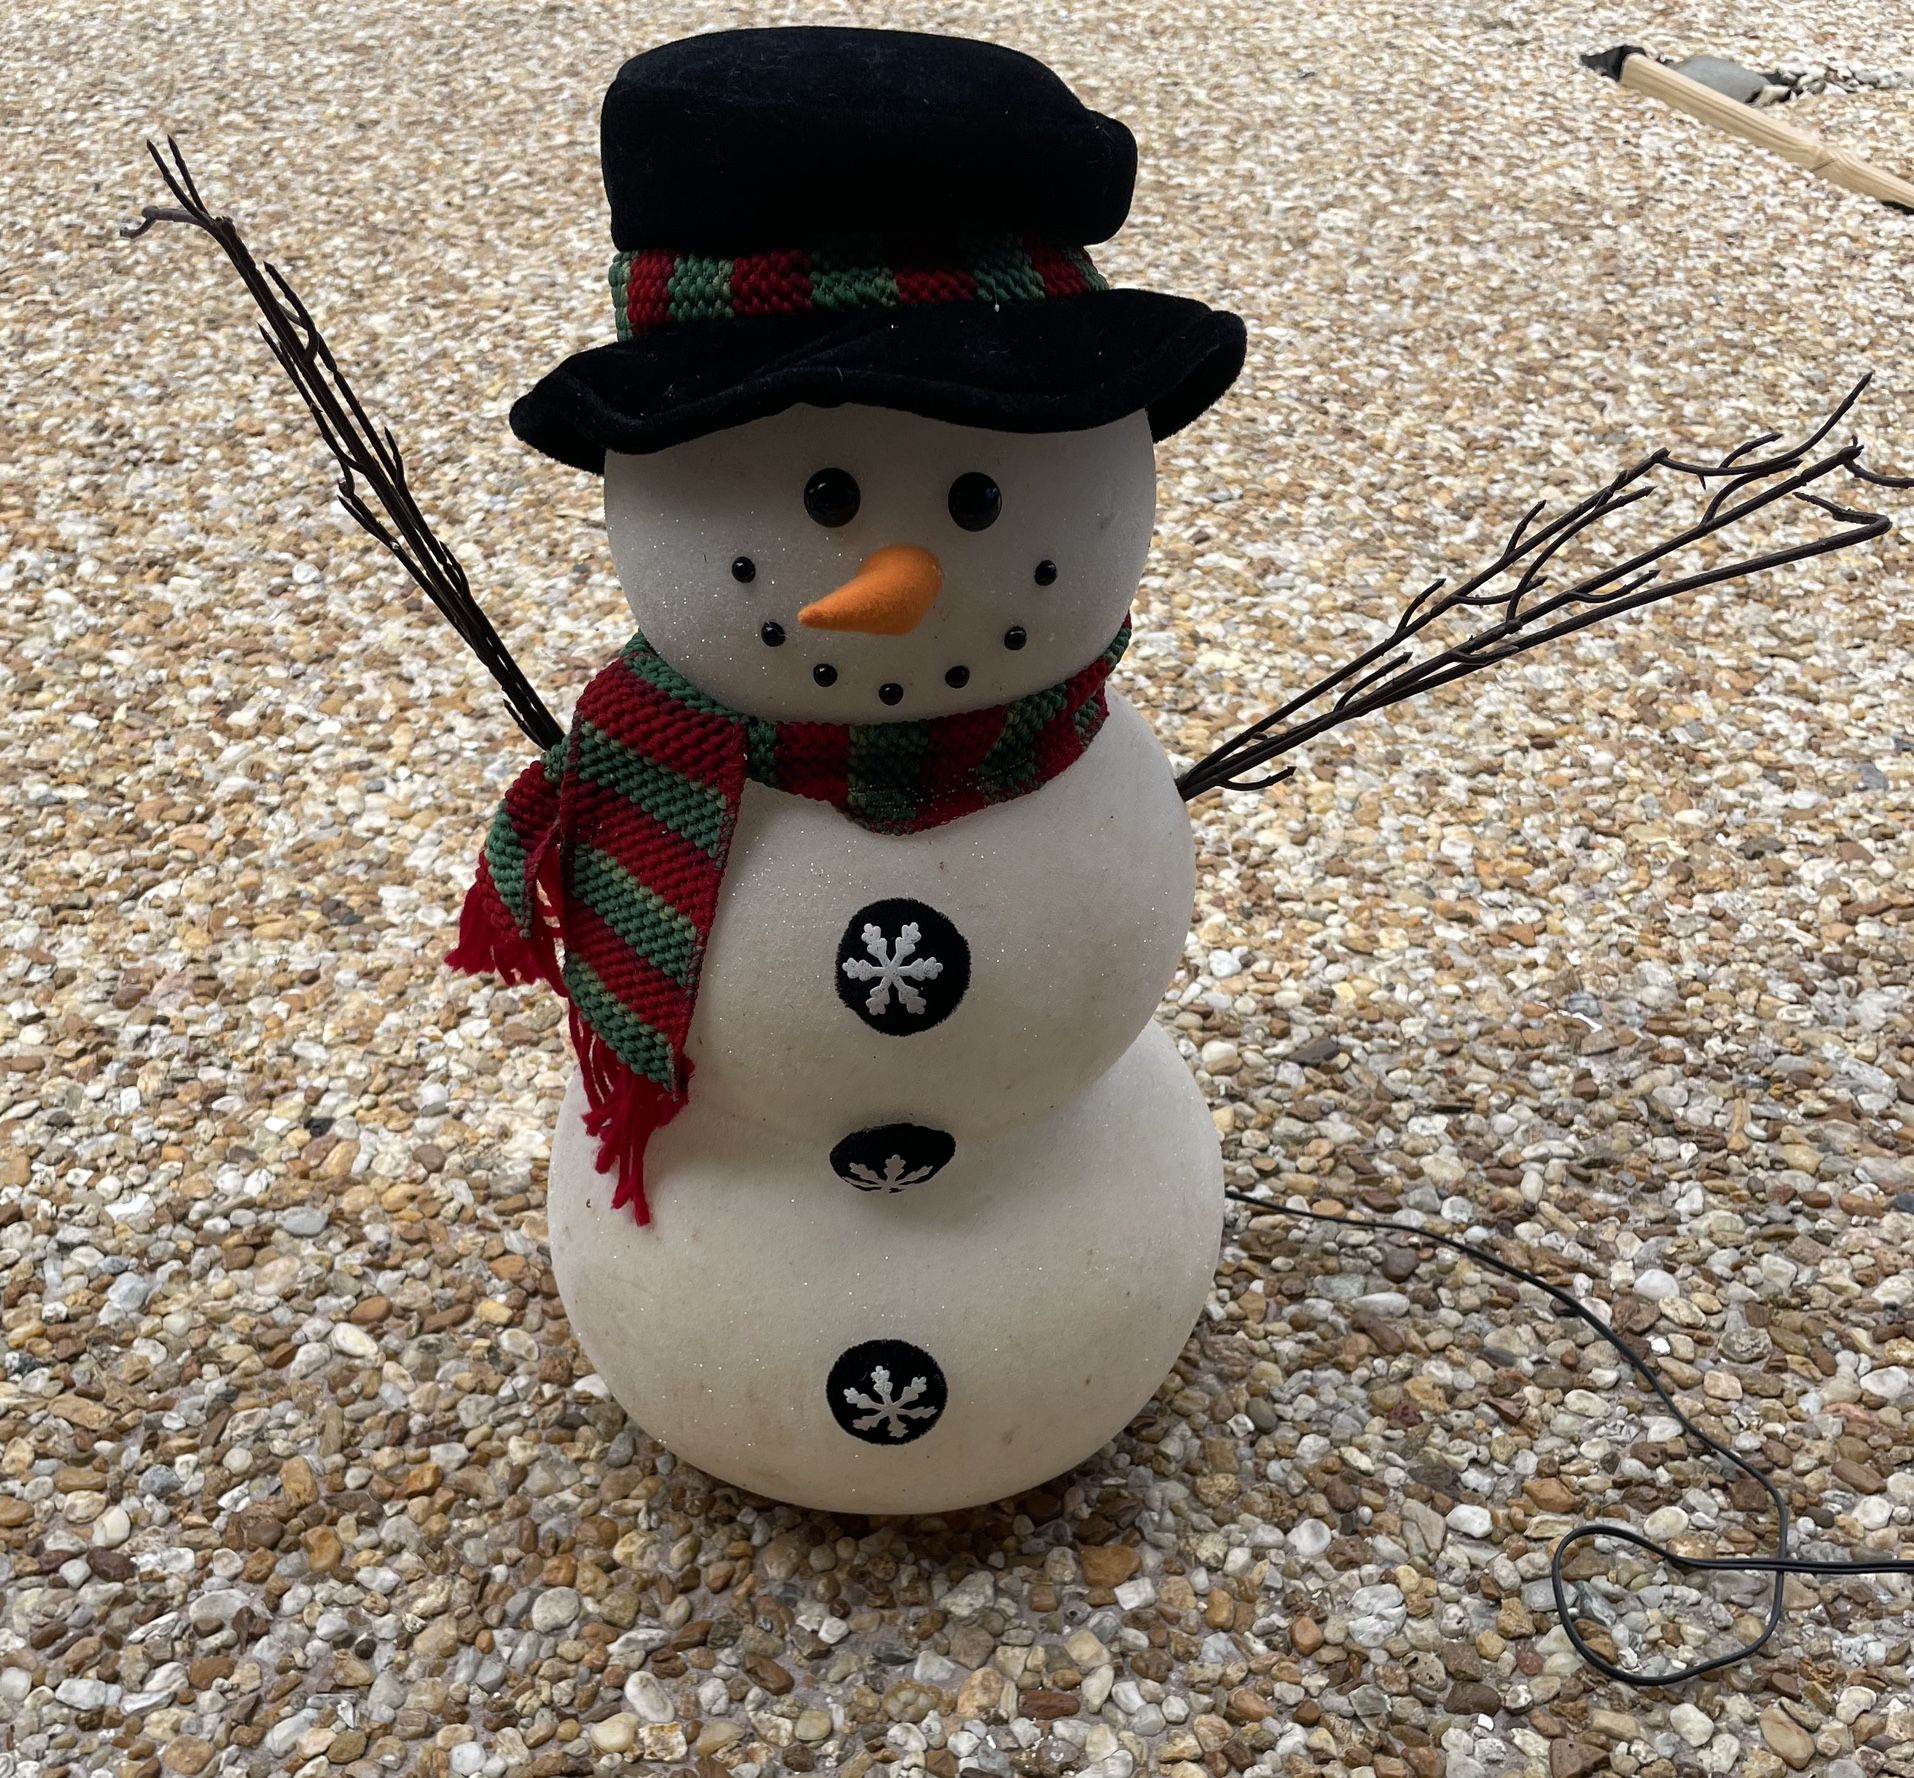 15’ Lighted Flocked Outdoor Holiday Snowman - Christmas Decor